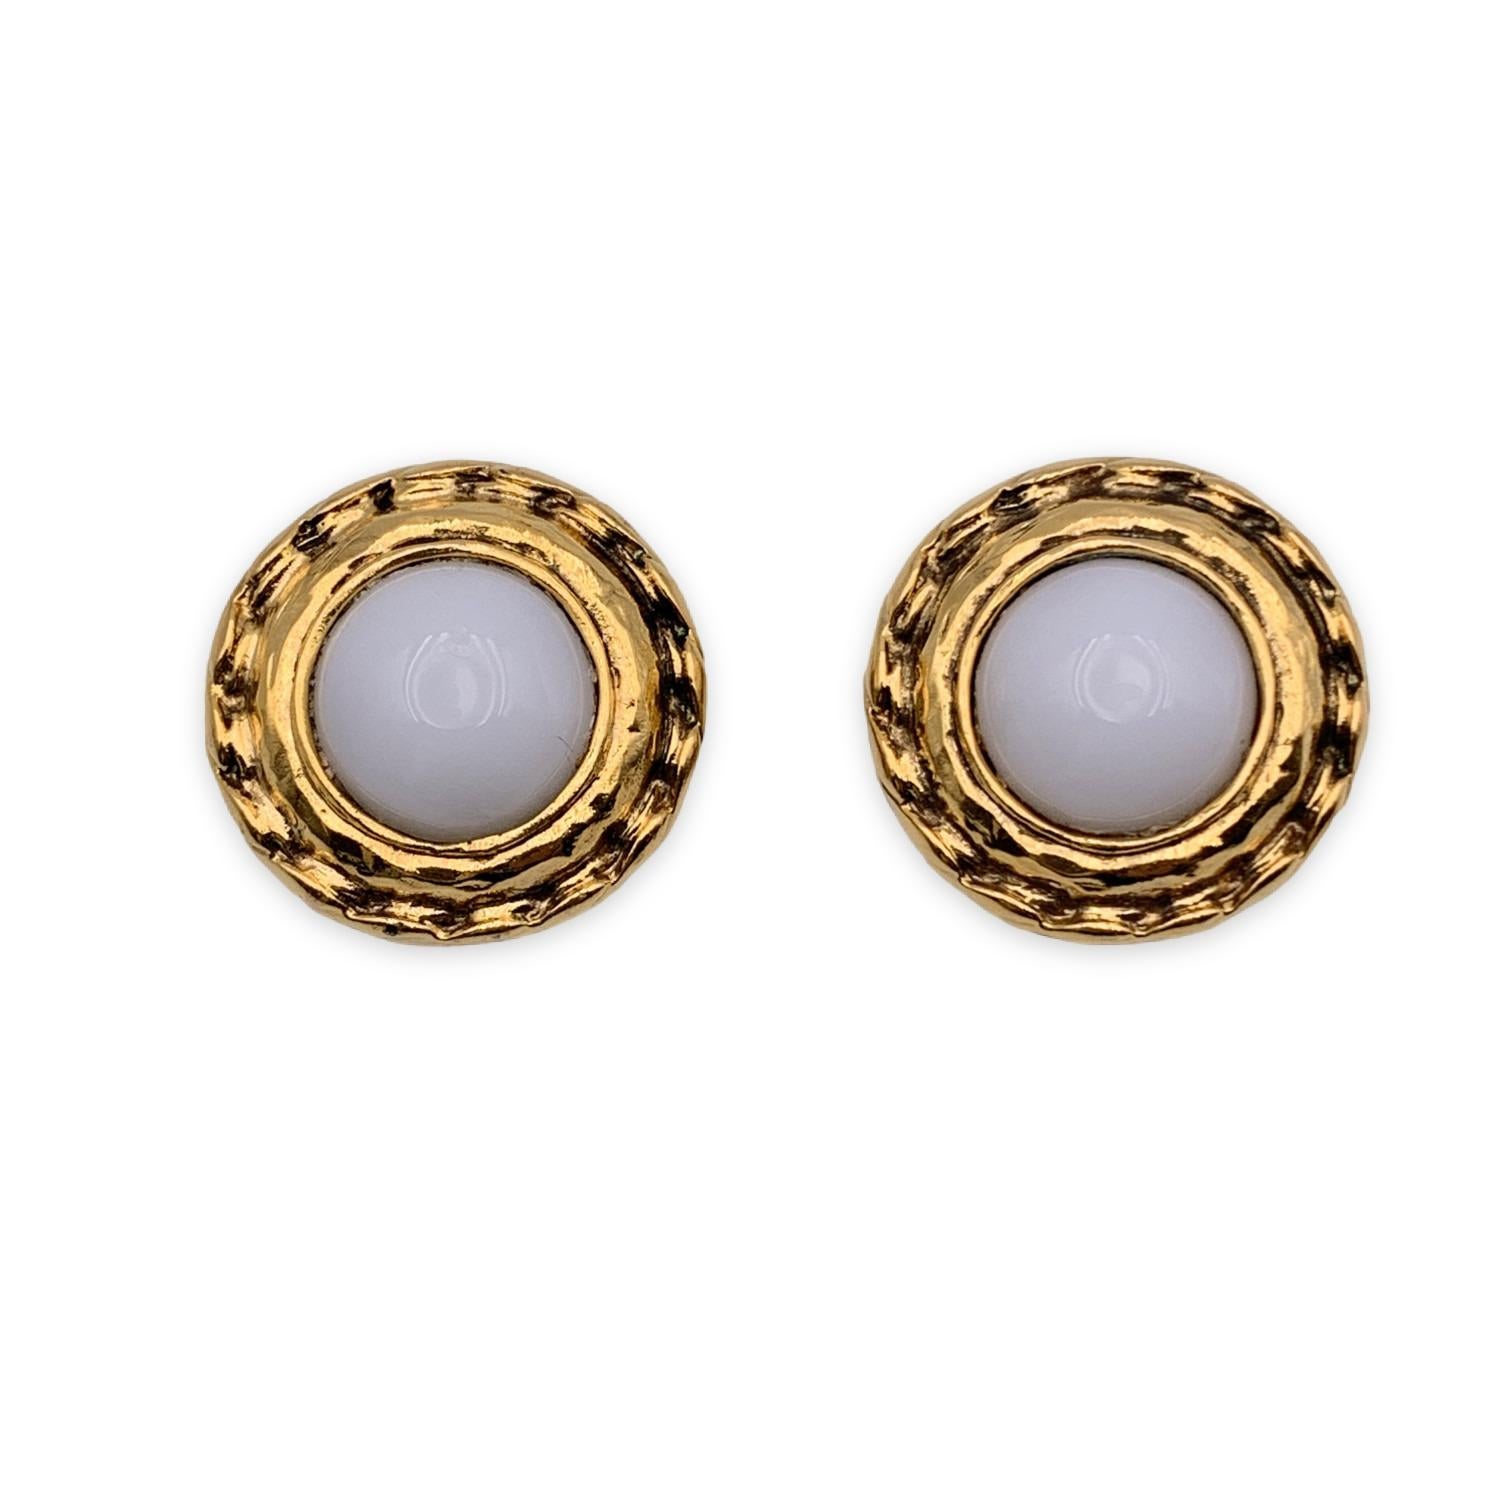 Gorgeous vintage CHANEL earrings. Faux Pearl and gold metal frame. Small CC logo on metal. Clip-on earrings. Signed 'Chanel CC - Made in France' oval hallmark on the reverse of the earring. Diameter: 1.25 inches - 32mm

Condition

A -